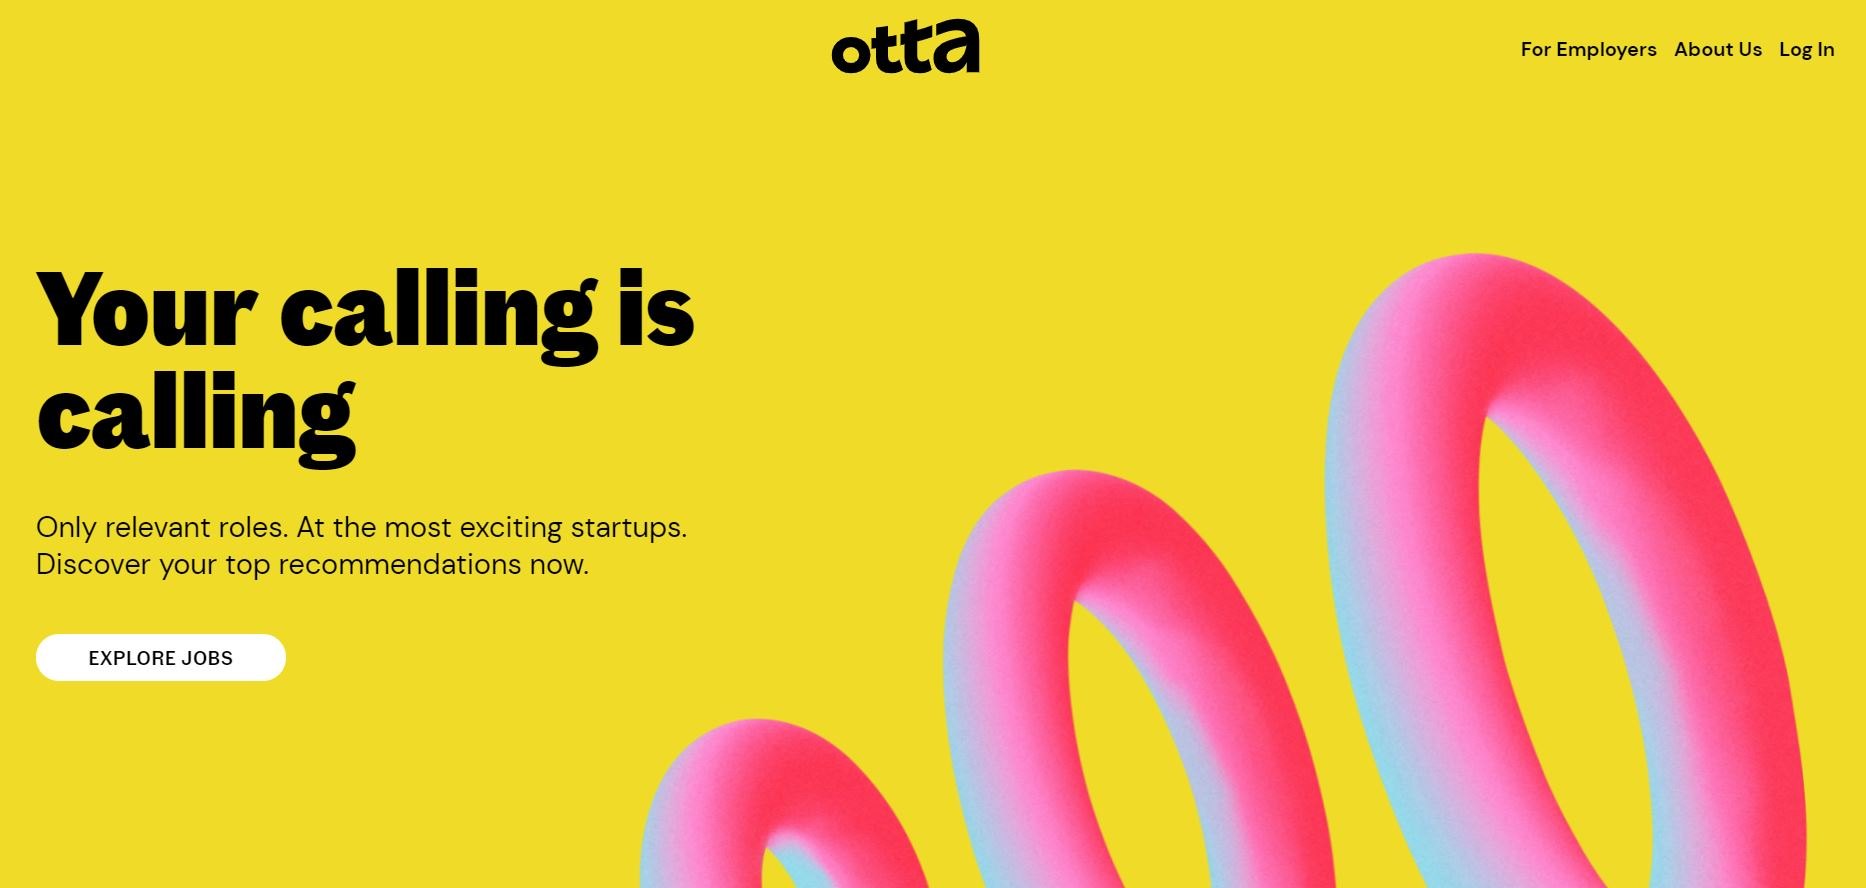 Otta Jobs - Search Online for Great Jobs